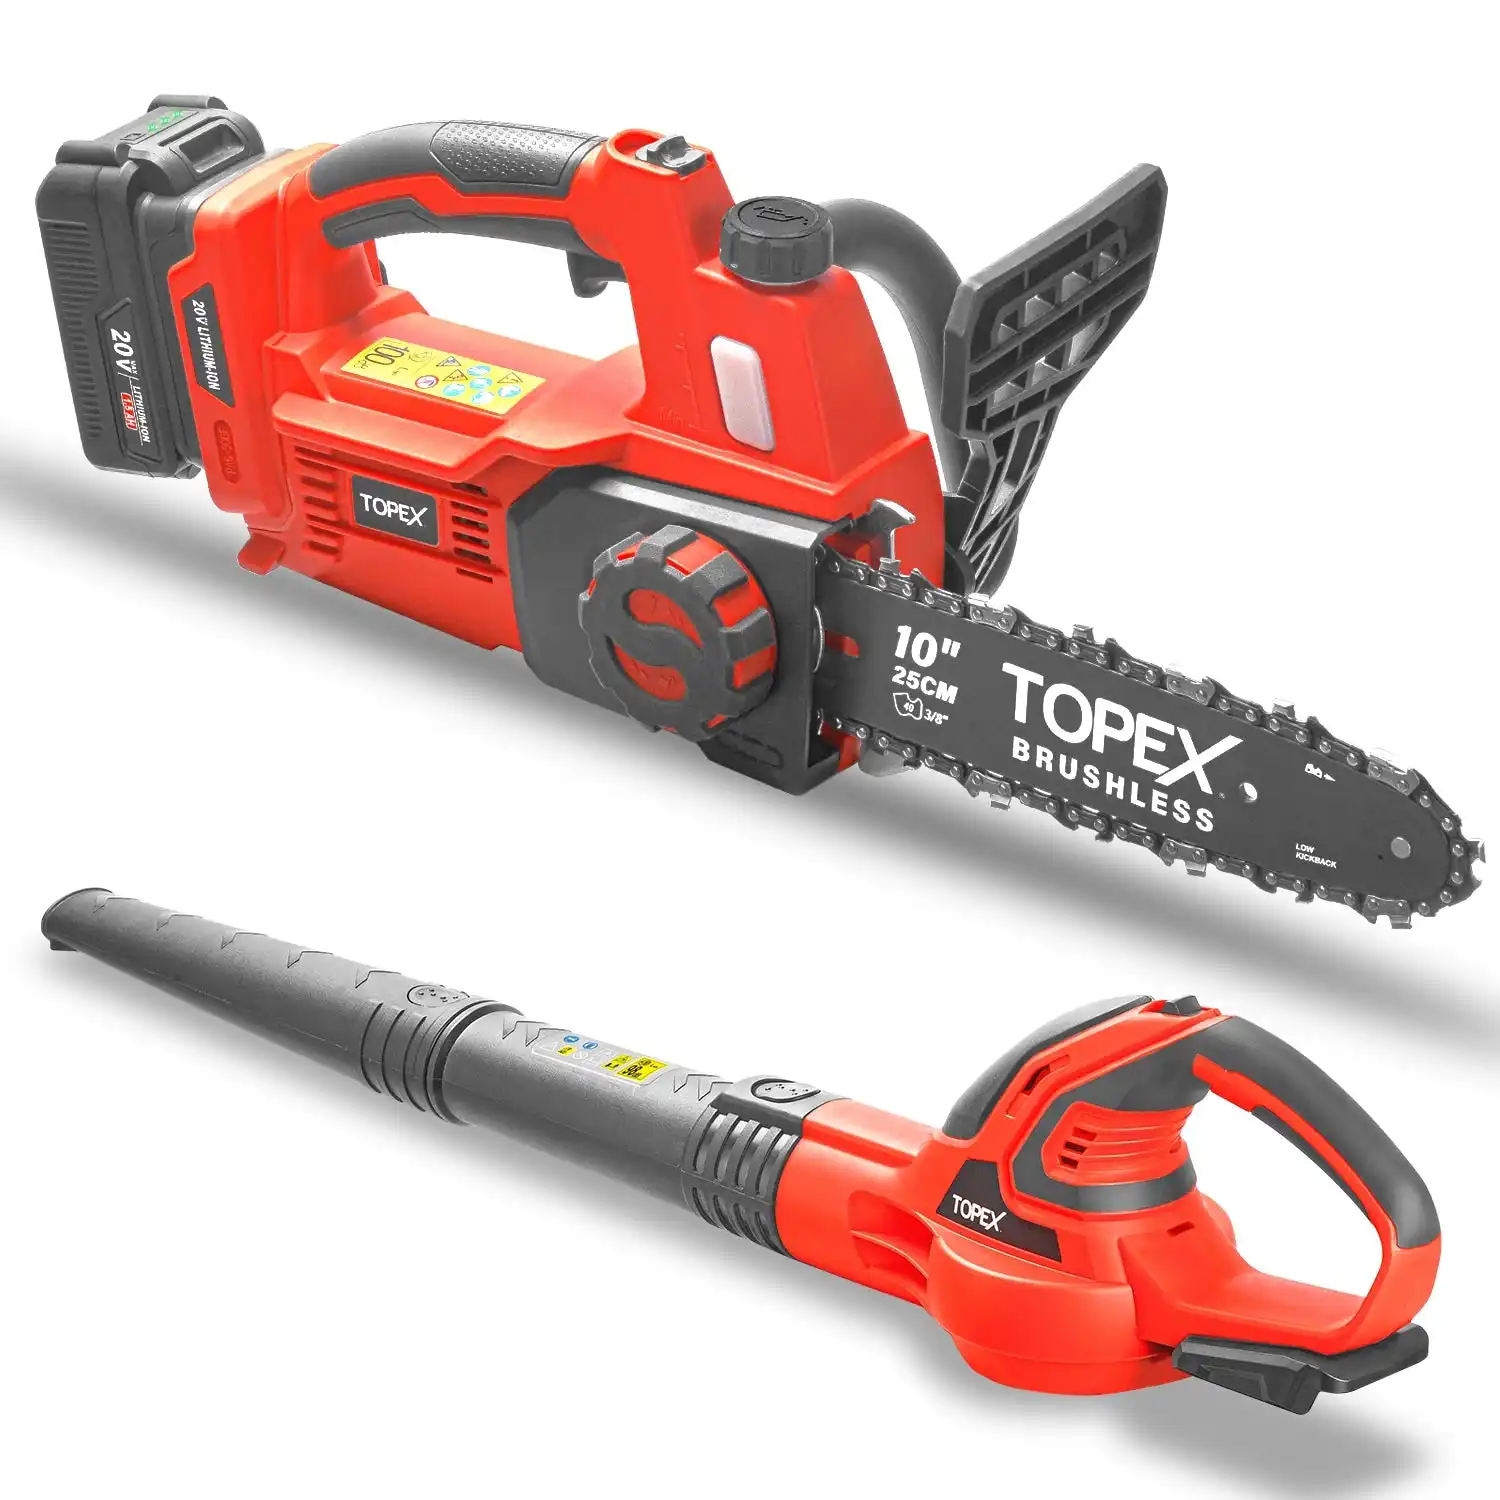 Topex 20V Cordless Chainsaw Leaf Blower Power Tool Combo Kit w/ 4.0Ah Battery